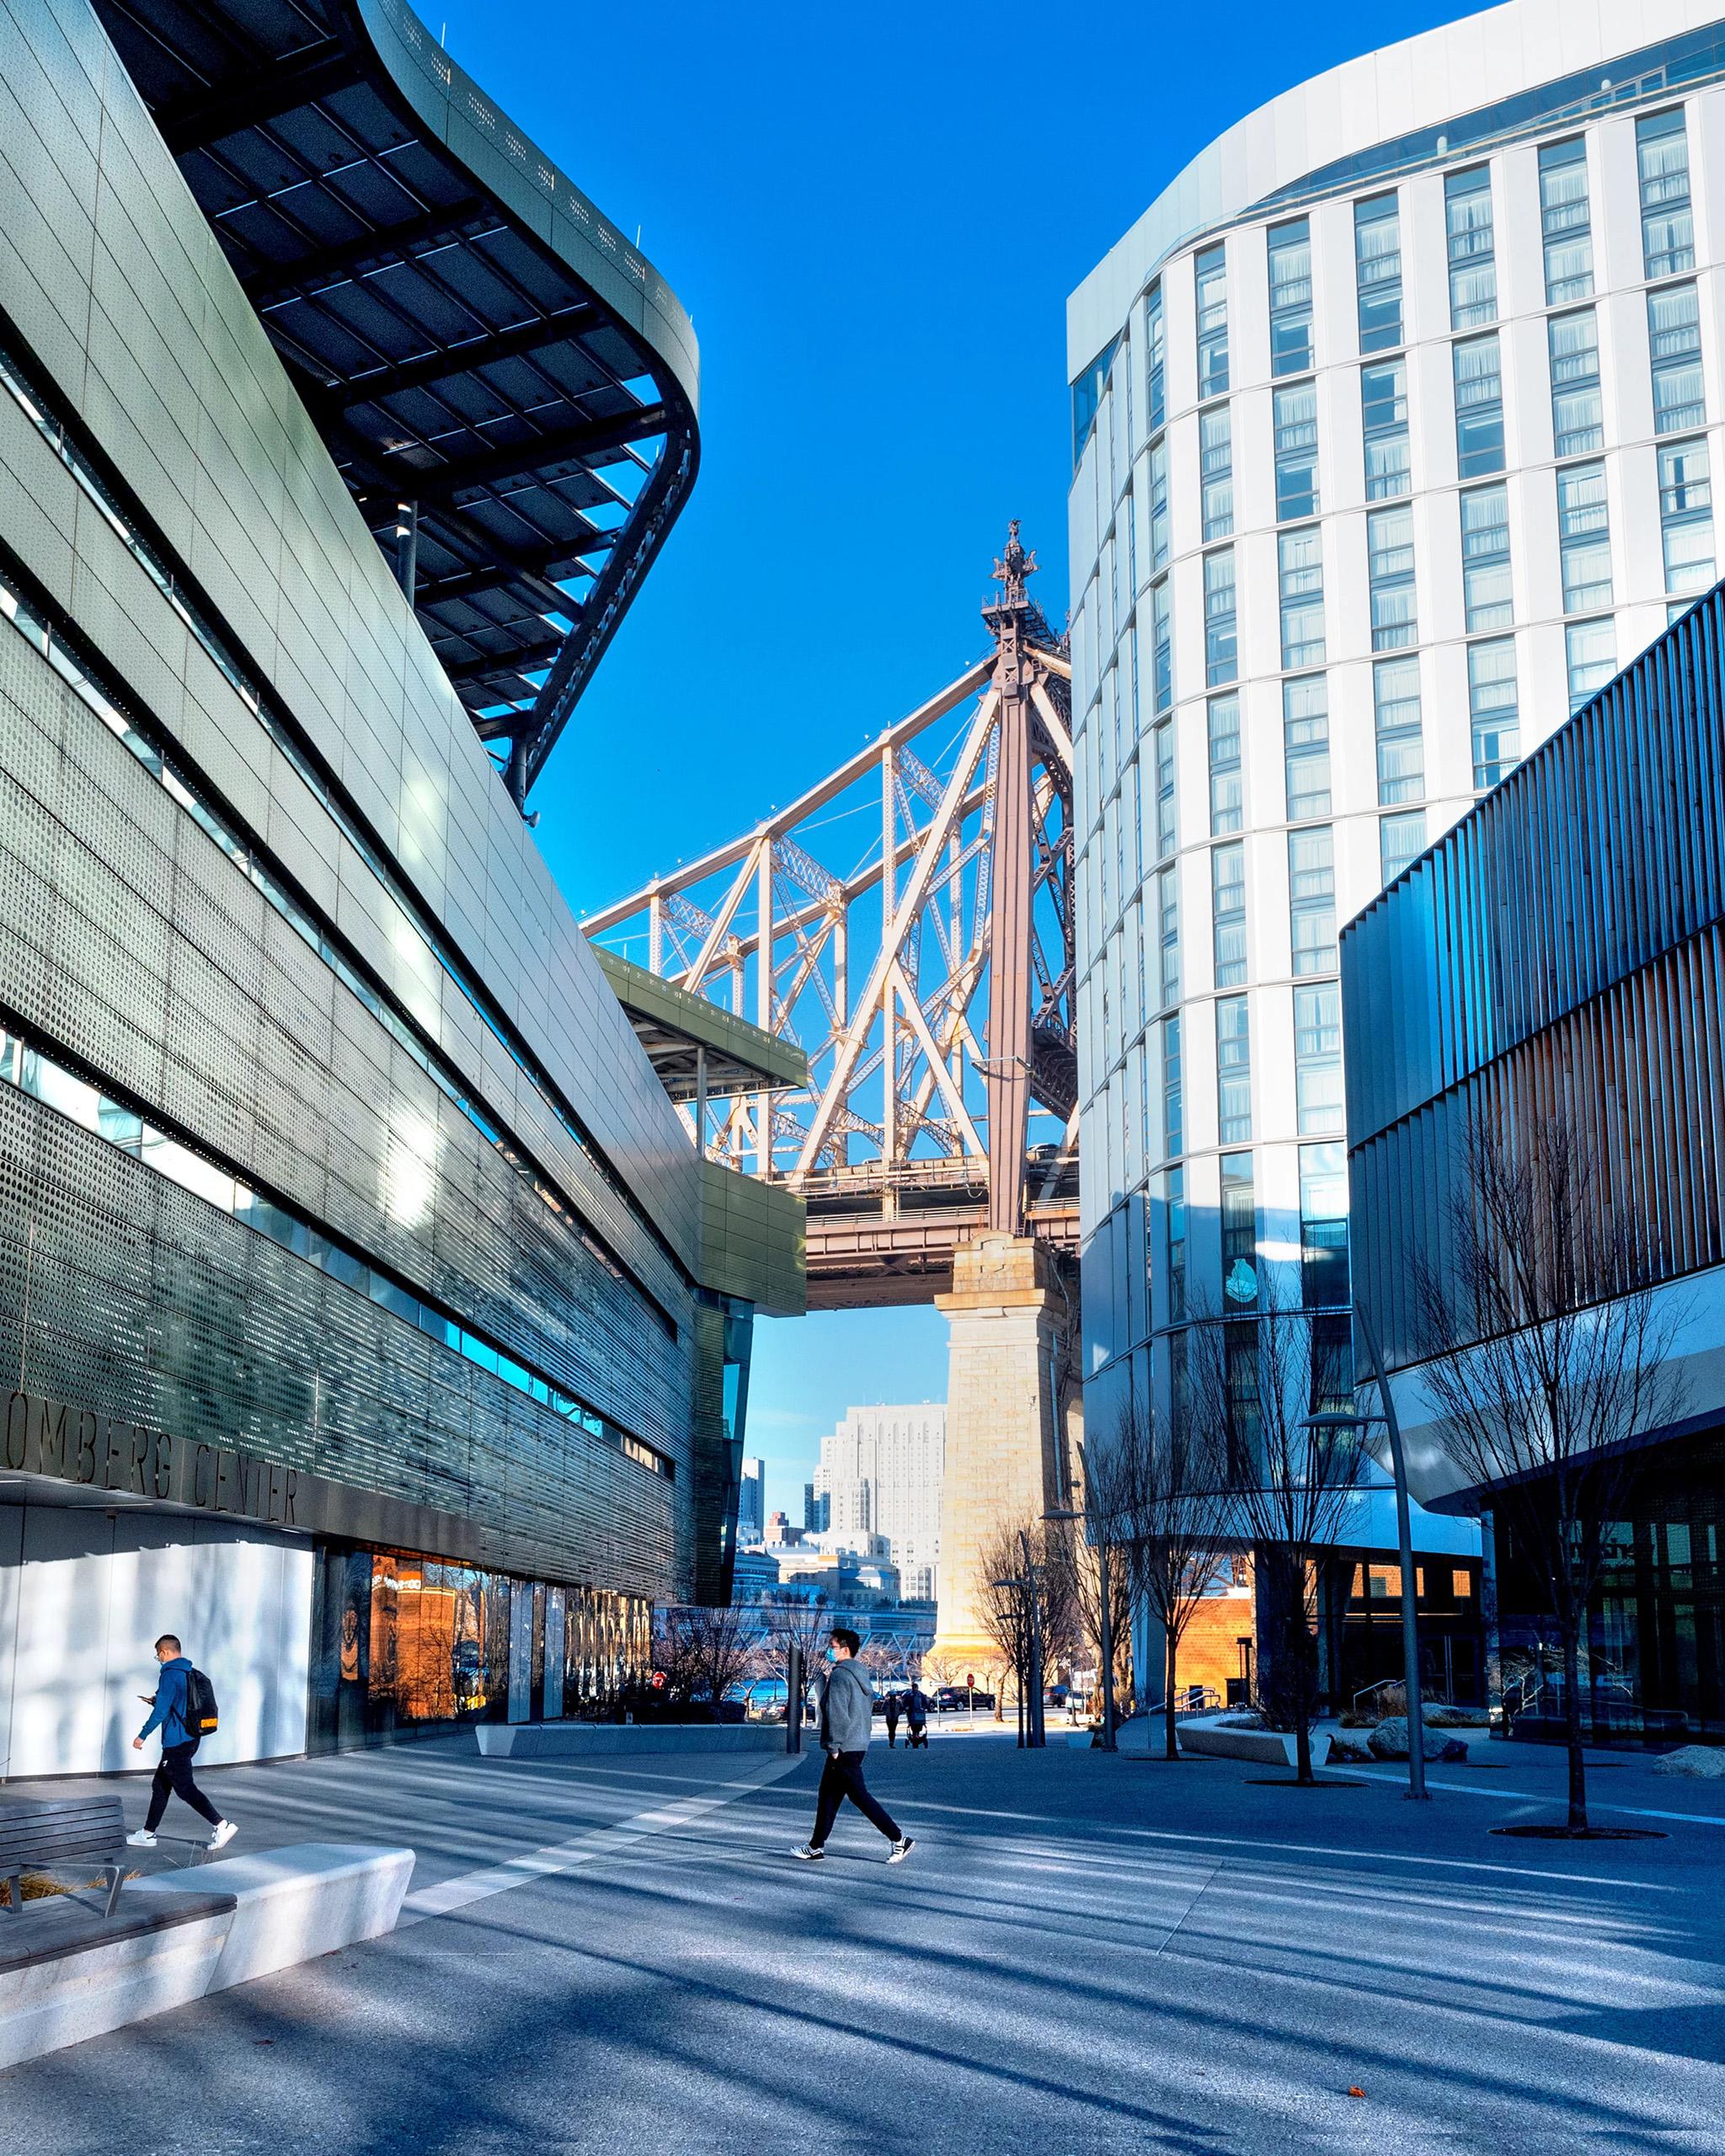 A photo of the Cornell Tech campus in New York City, looking down the main throughway with the Queensborough bridge in the background